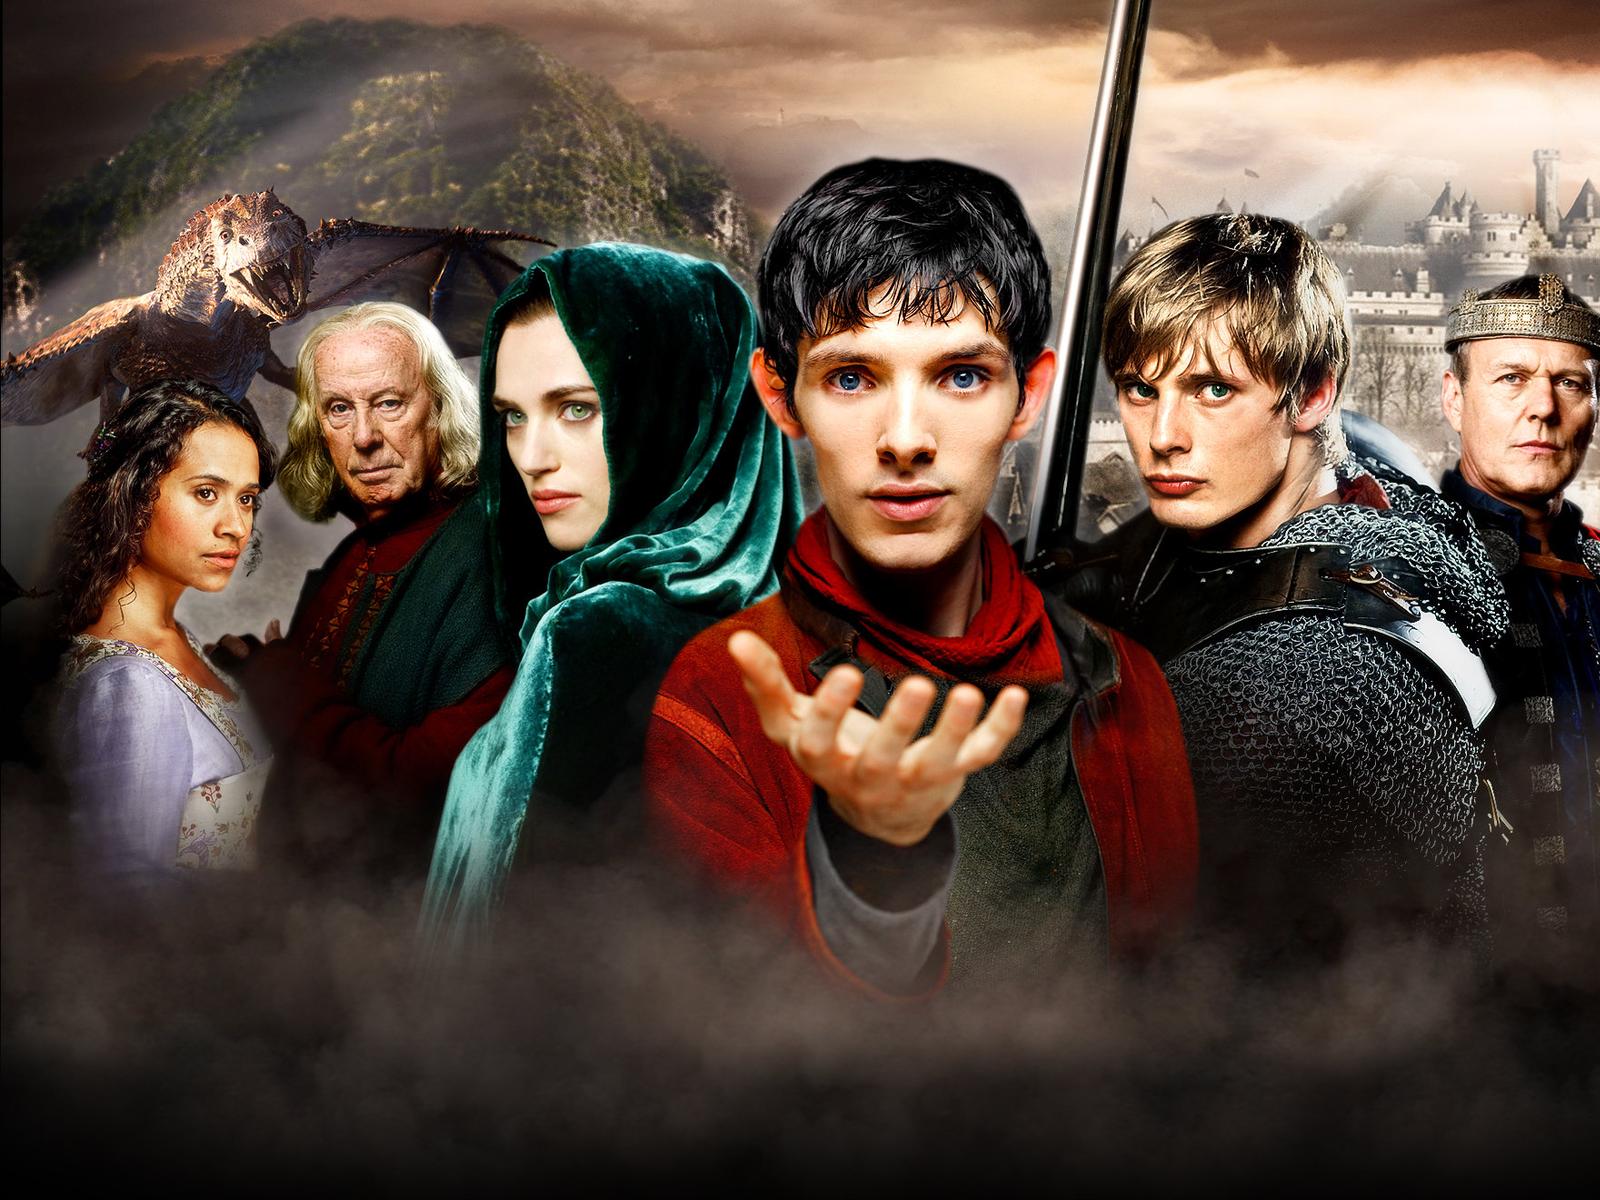 Guinevere, Gaius, Morgana, Merlin, Arthur and Uther of 'Merlin'